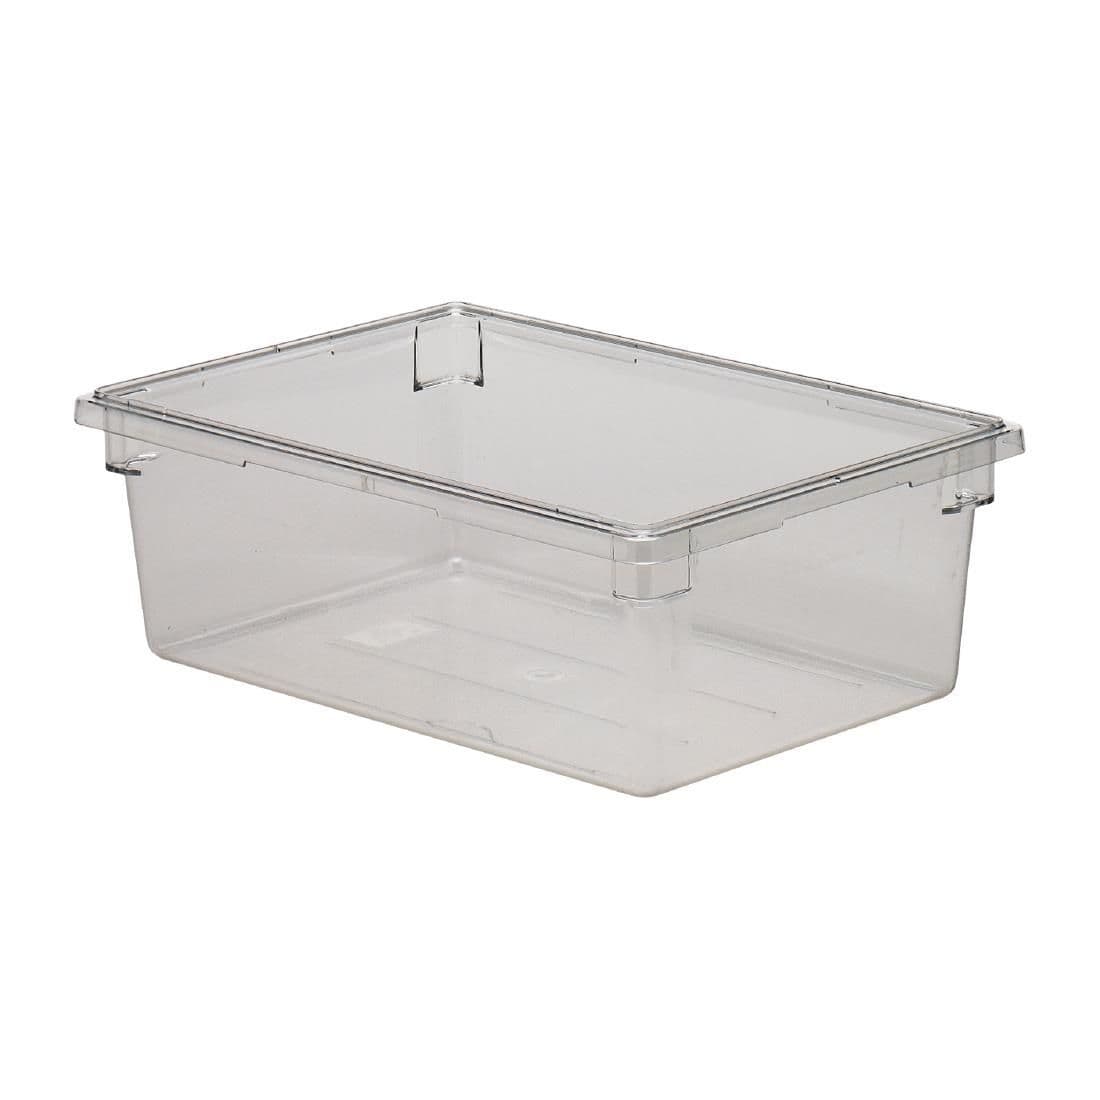 FE734 Cambro Polycarbonate Food Storage Box 49Ltr JD Catering Equipment Solutions Ltd